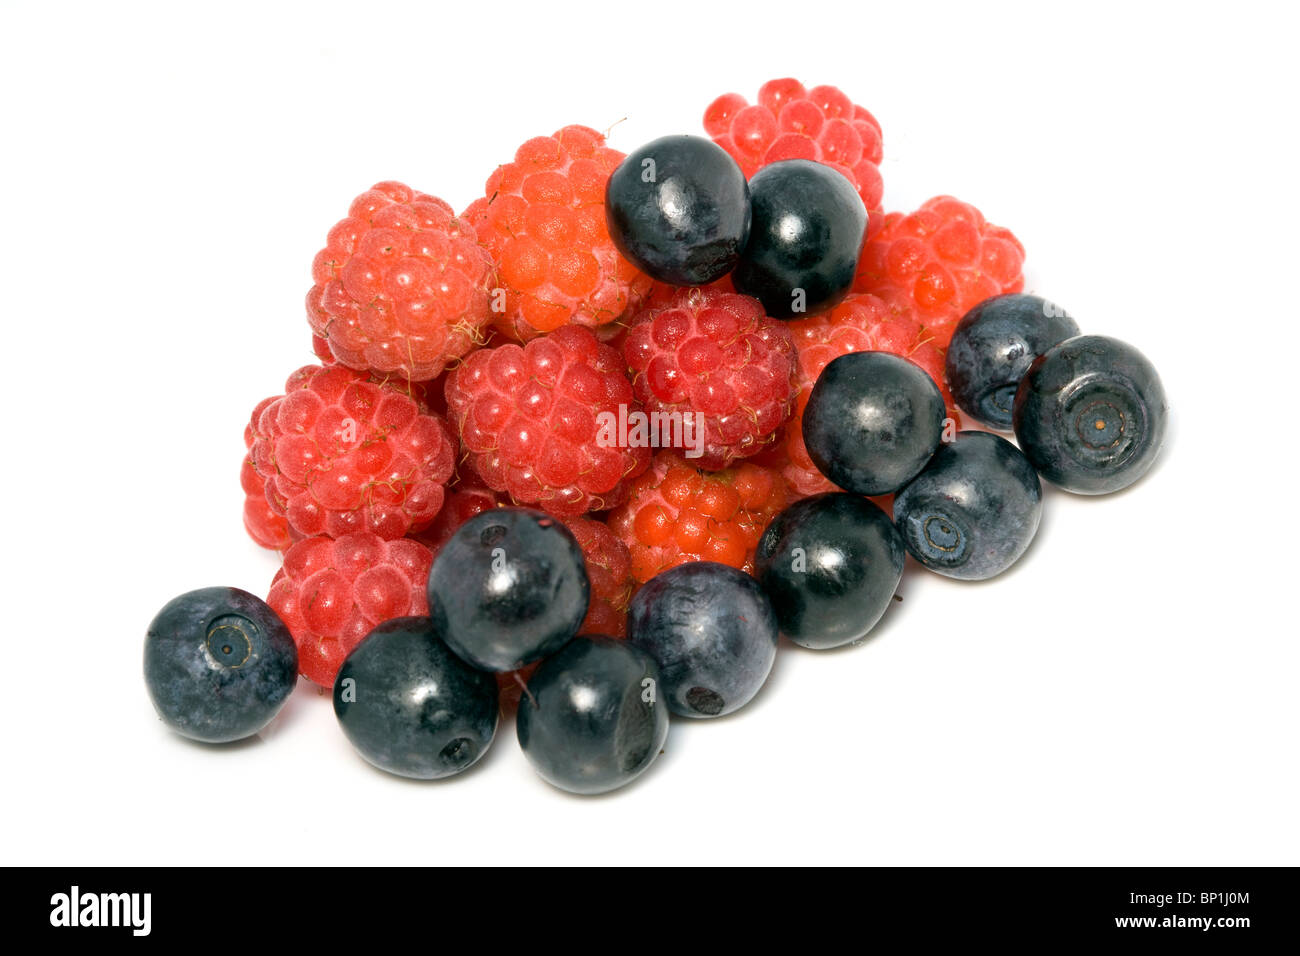 berries of raspberry and bilberry on white background Stock Photo